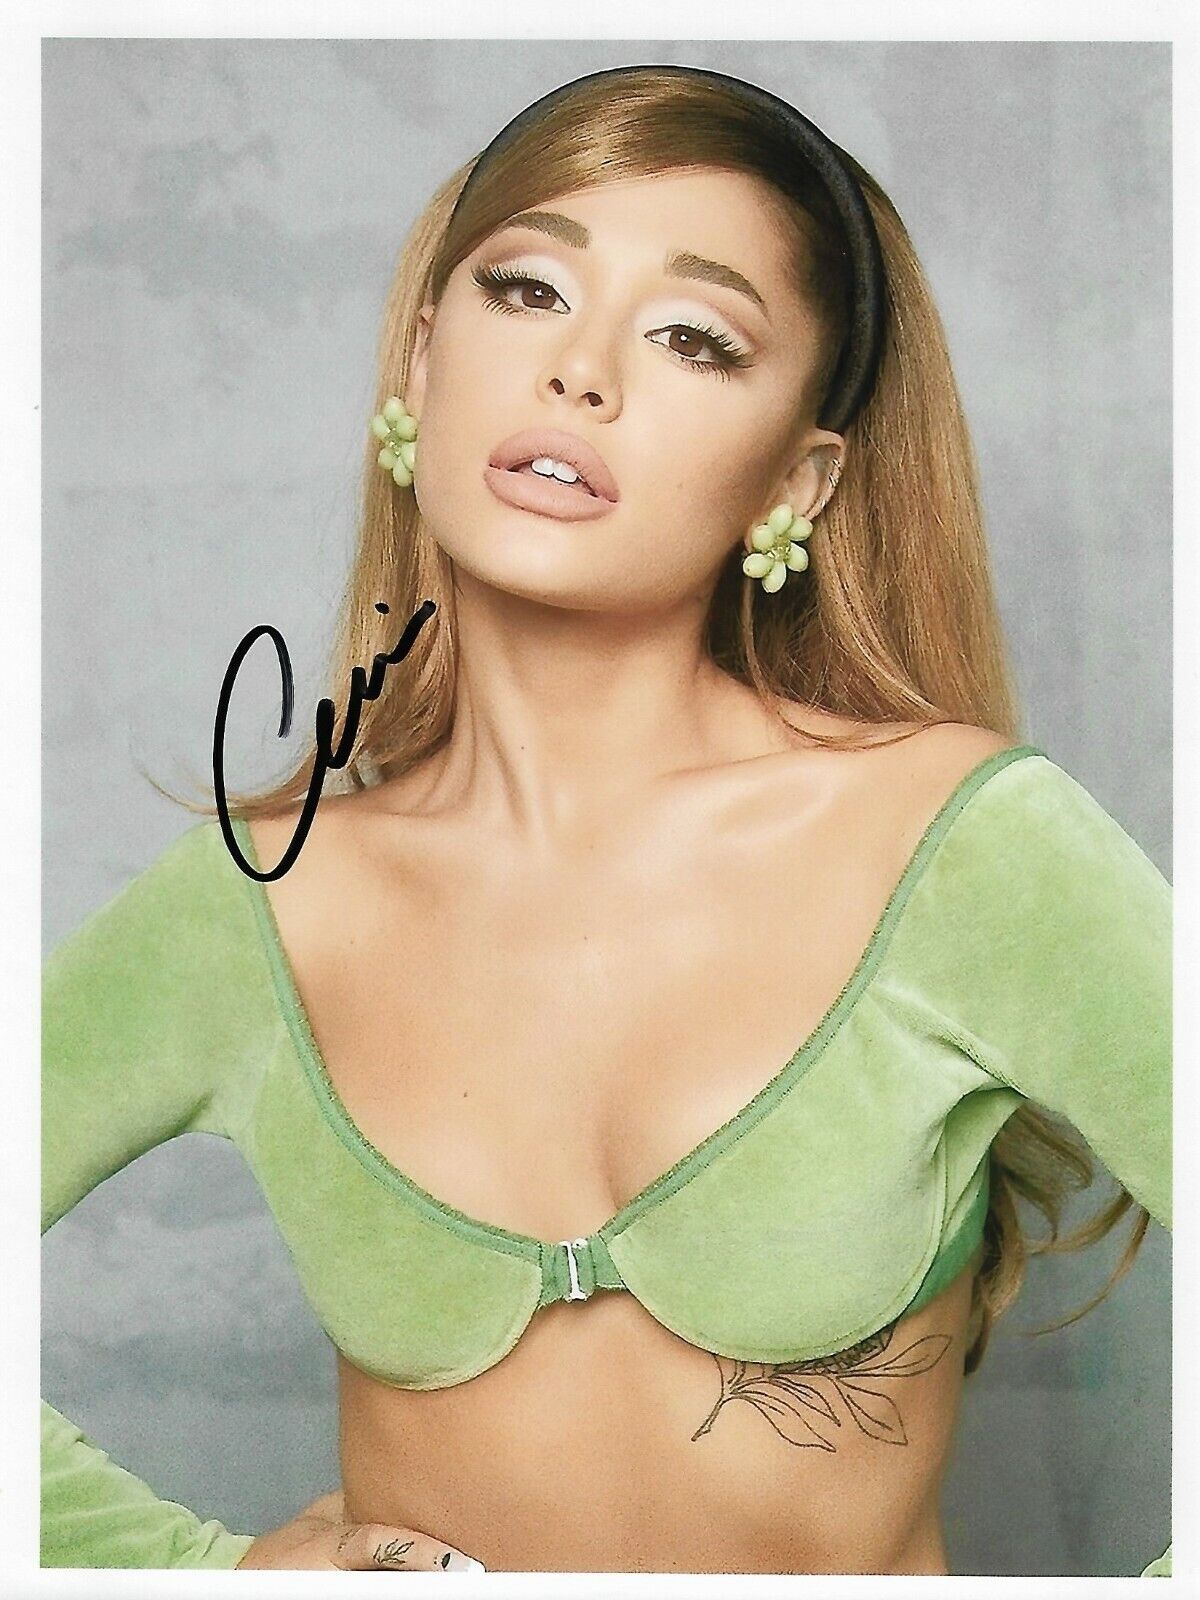 Ariana Grande Signed Autographed 8x10 Photo Poster painting incl. COA